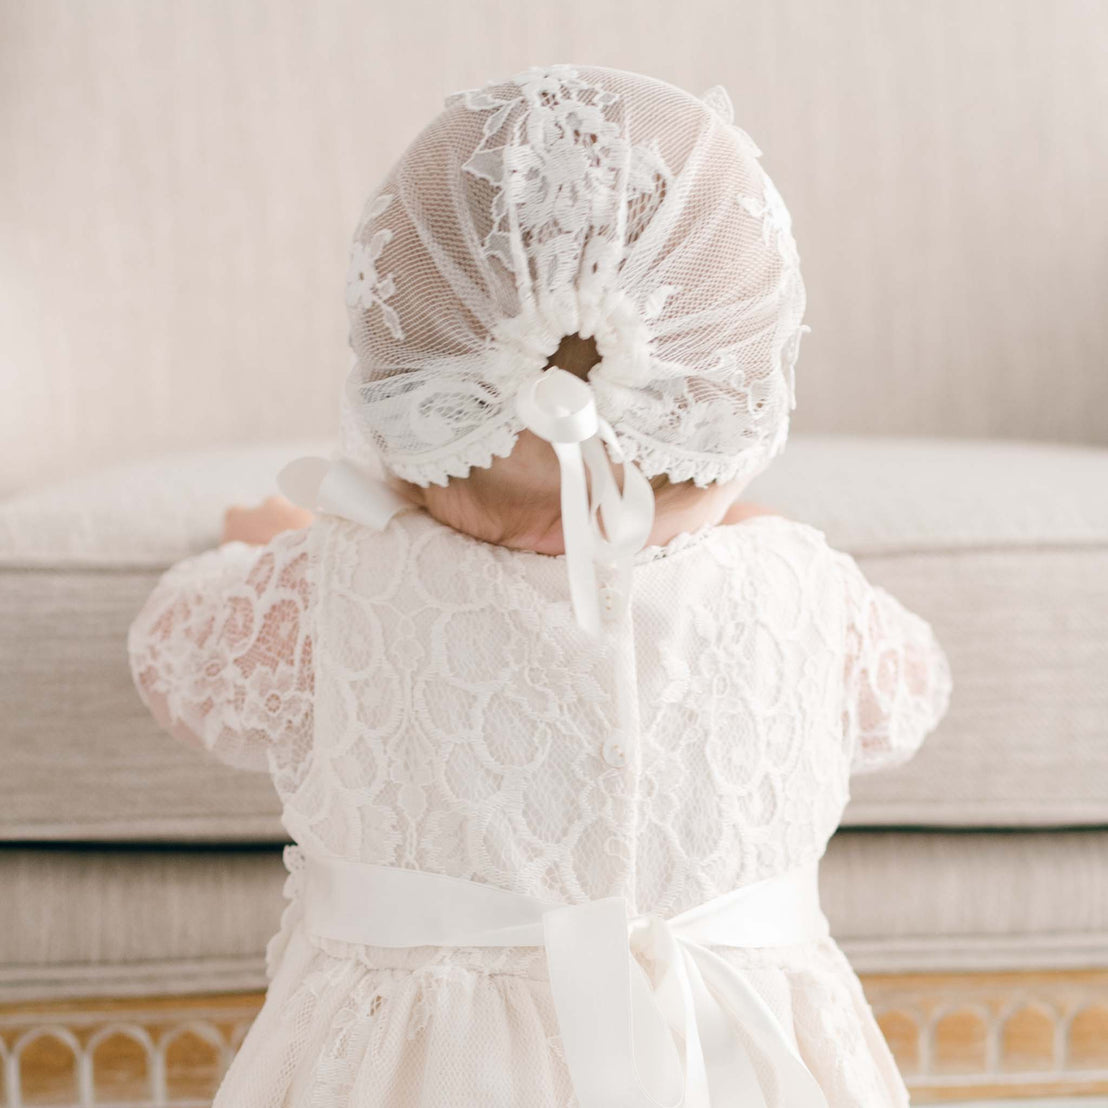 A baby dressed in an elegant white Juliette Lace Bonnet gown and bonnet, handcrafted with luxury boutique materials, standing with back to the camera.